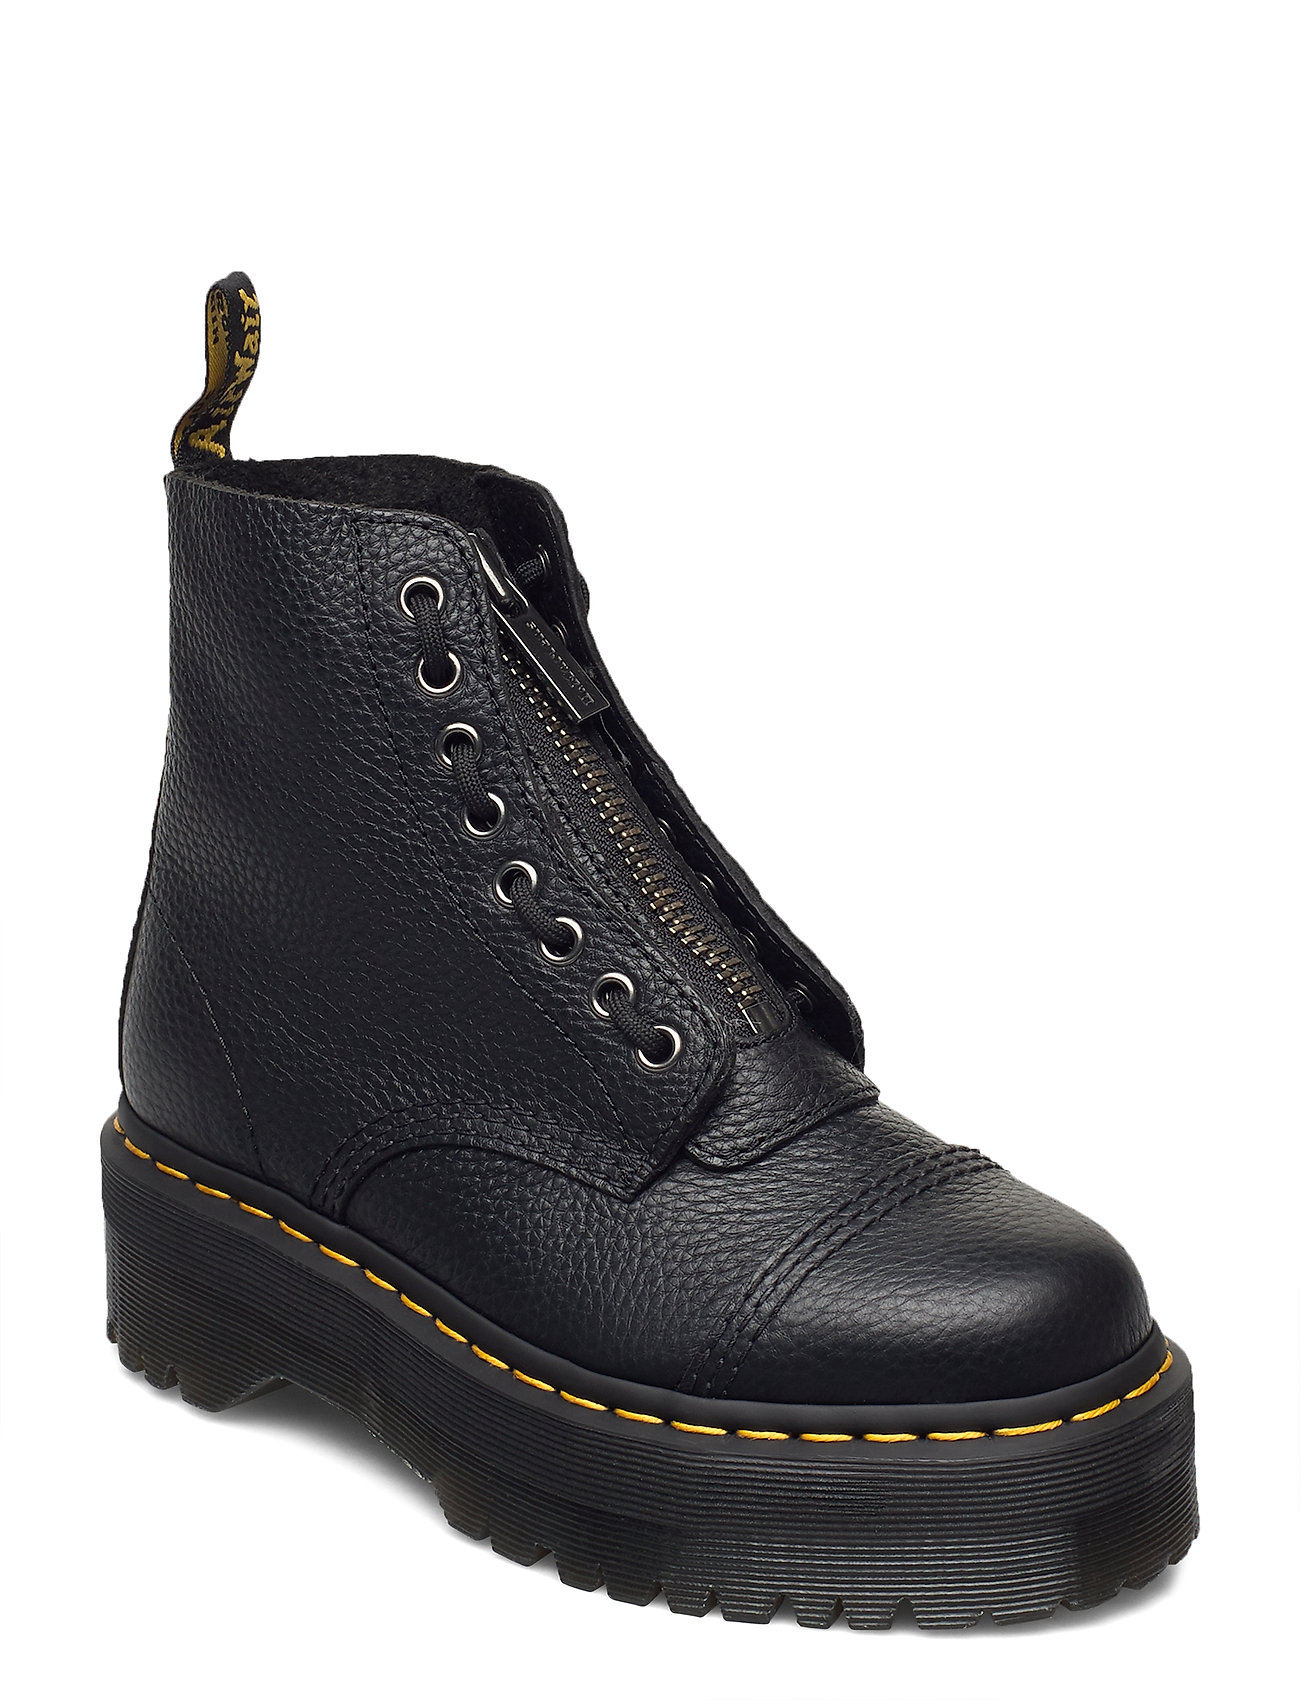 Sinclair Black Milled Nappa Shoes Boots Ankle Boots Ankle Boot - Flat Musta Dr. Martens